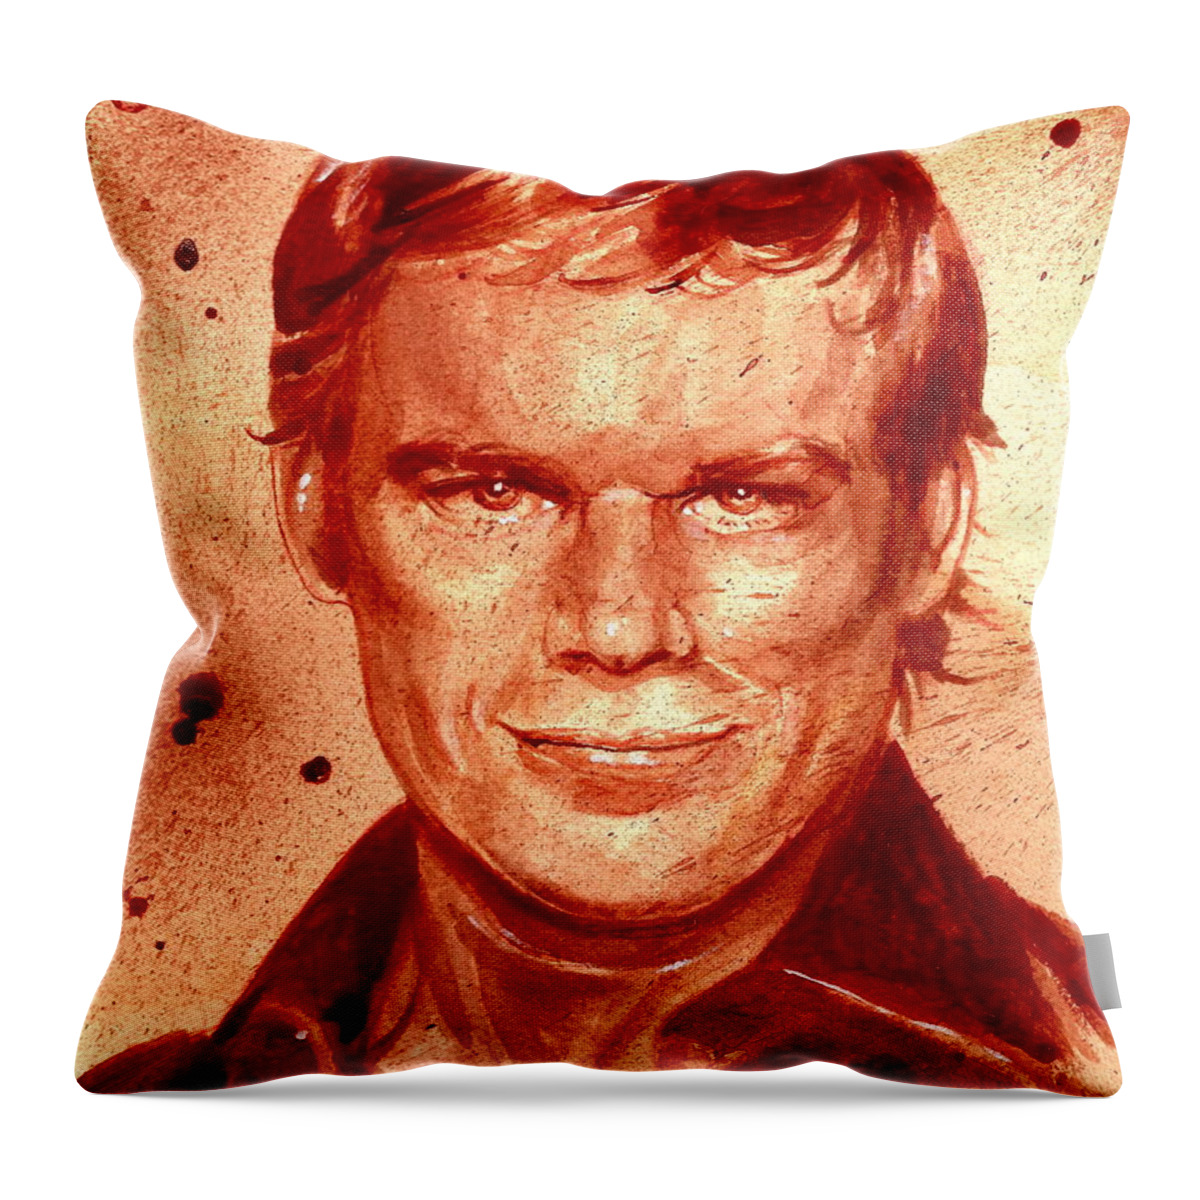 Dexter Throw Pillow featuring the painting Dexter by Ryan Almighty